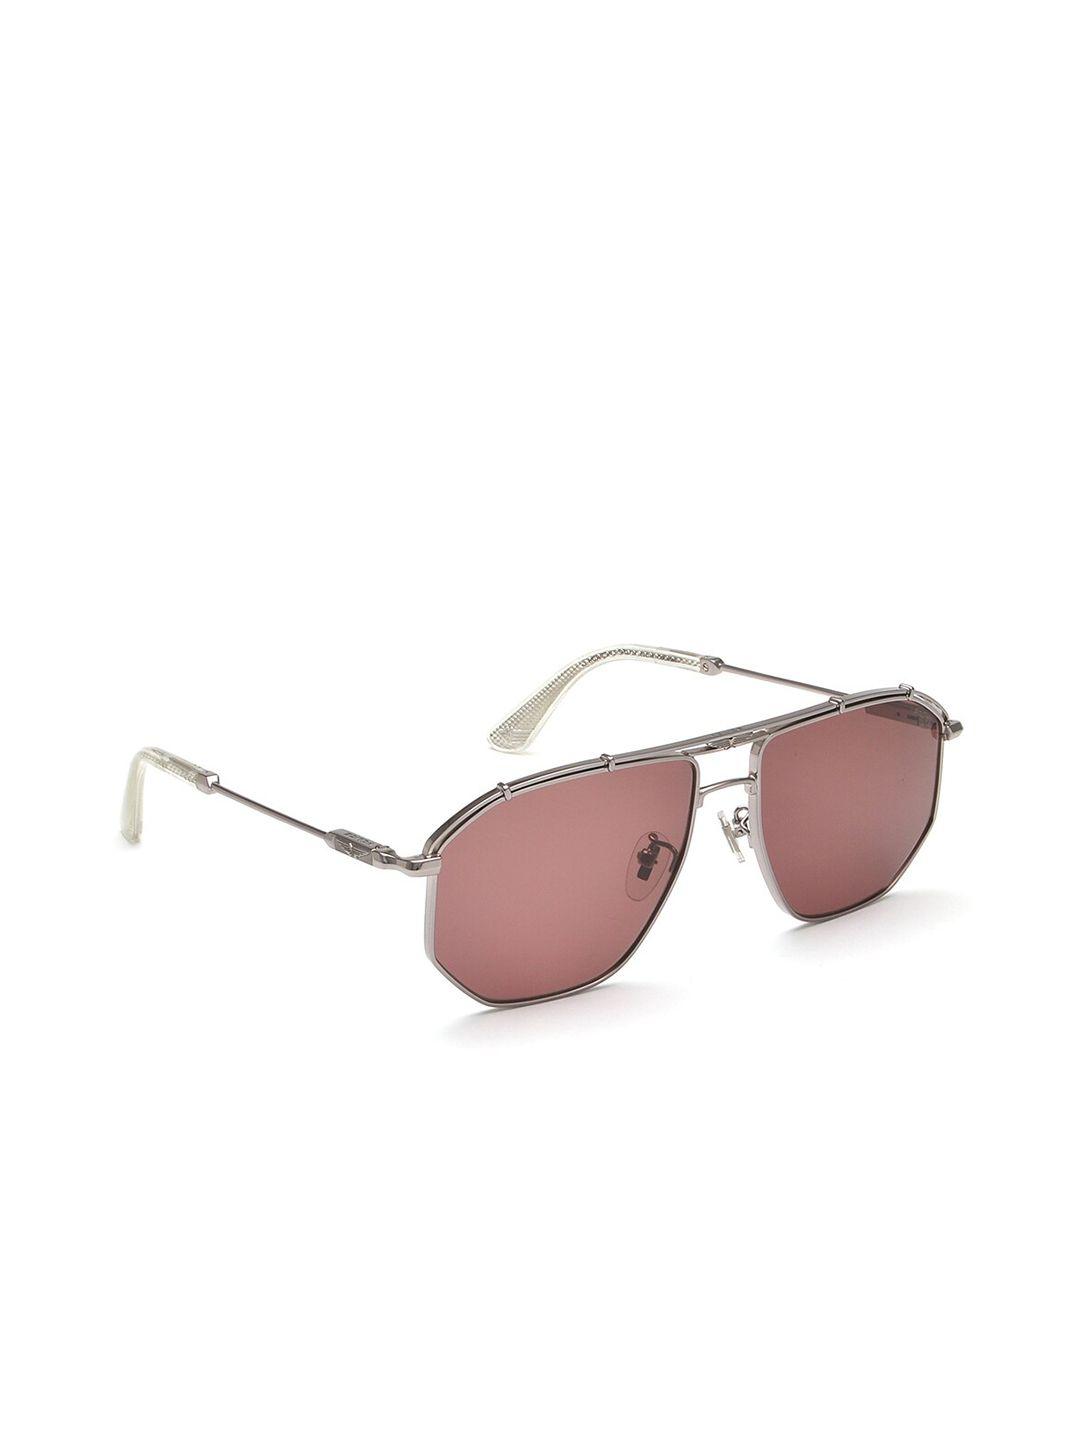 police men aviator sunglasses with uv protected lens